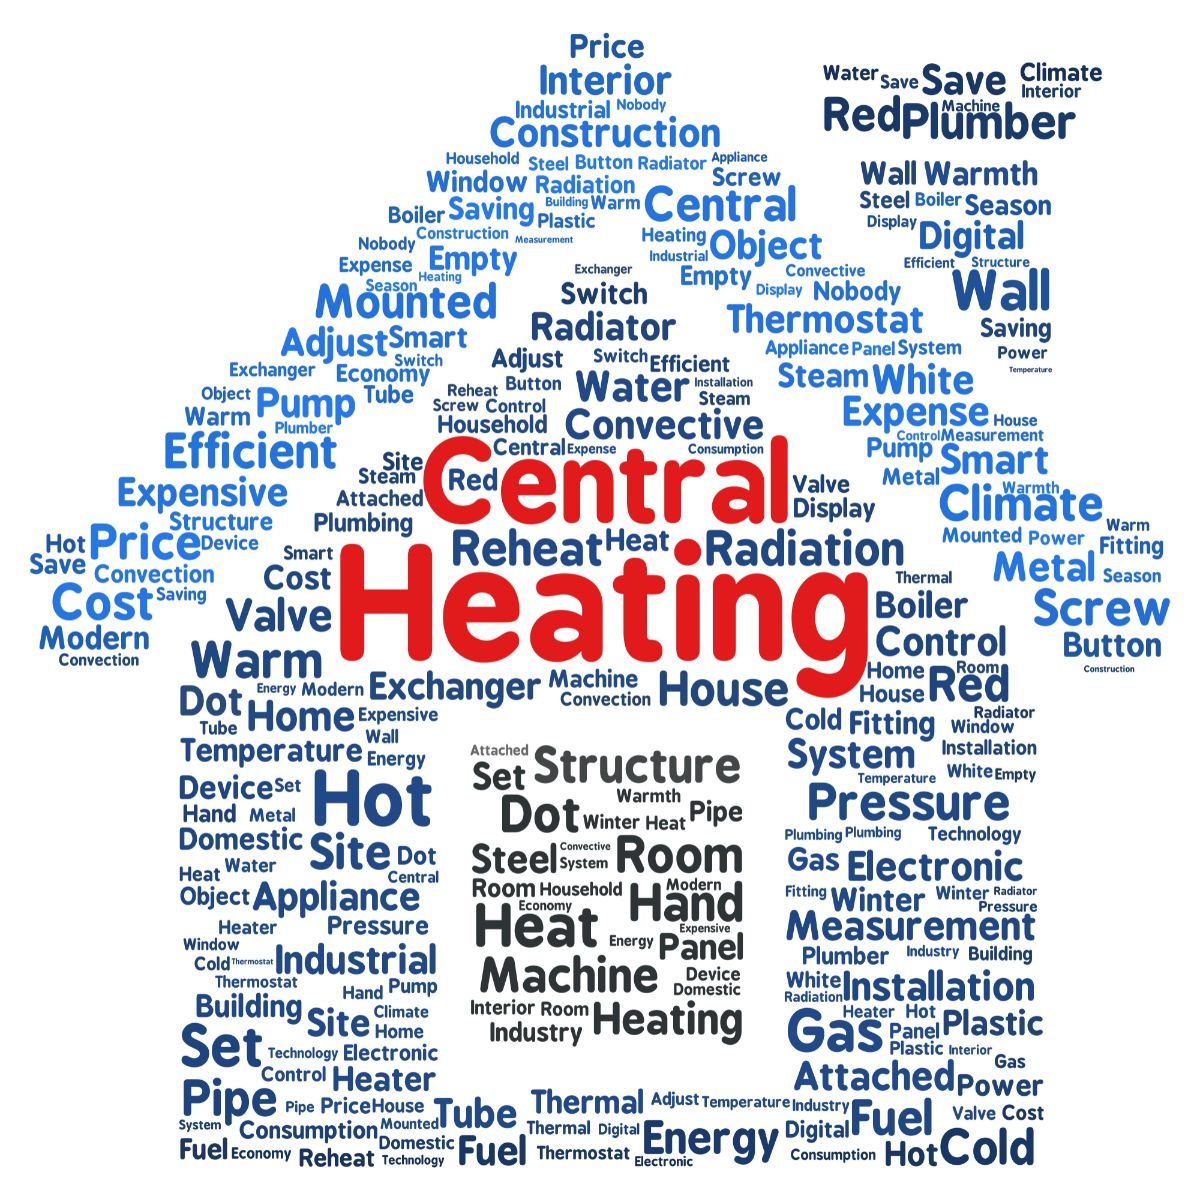 types-of-central-heating-systems-and-boilers-explained-heatology